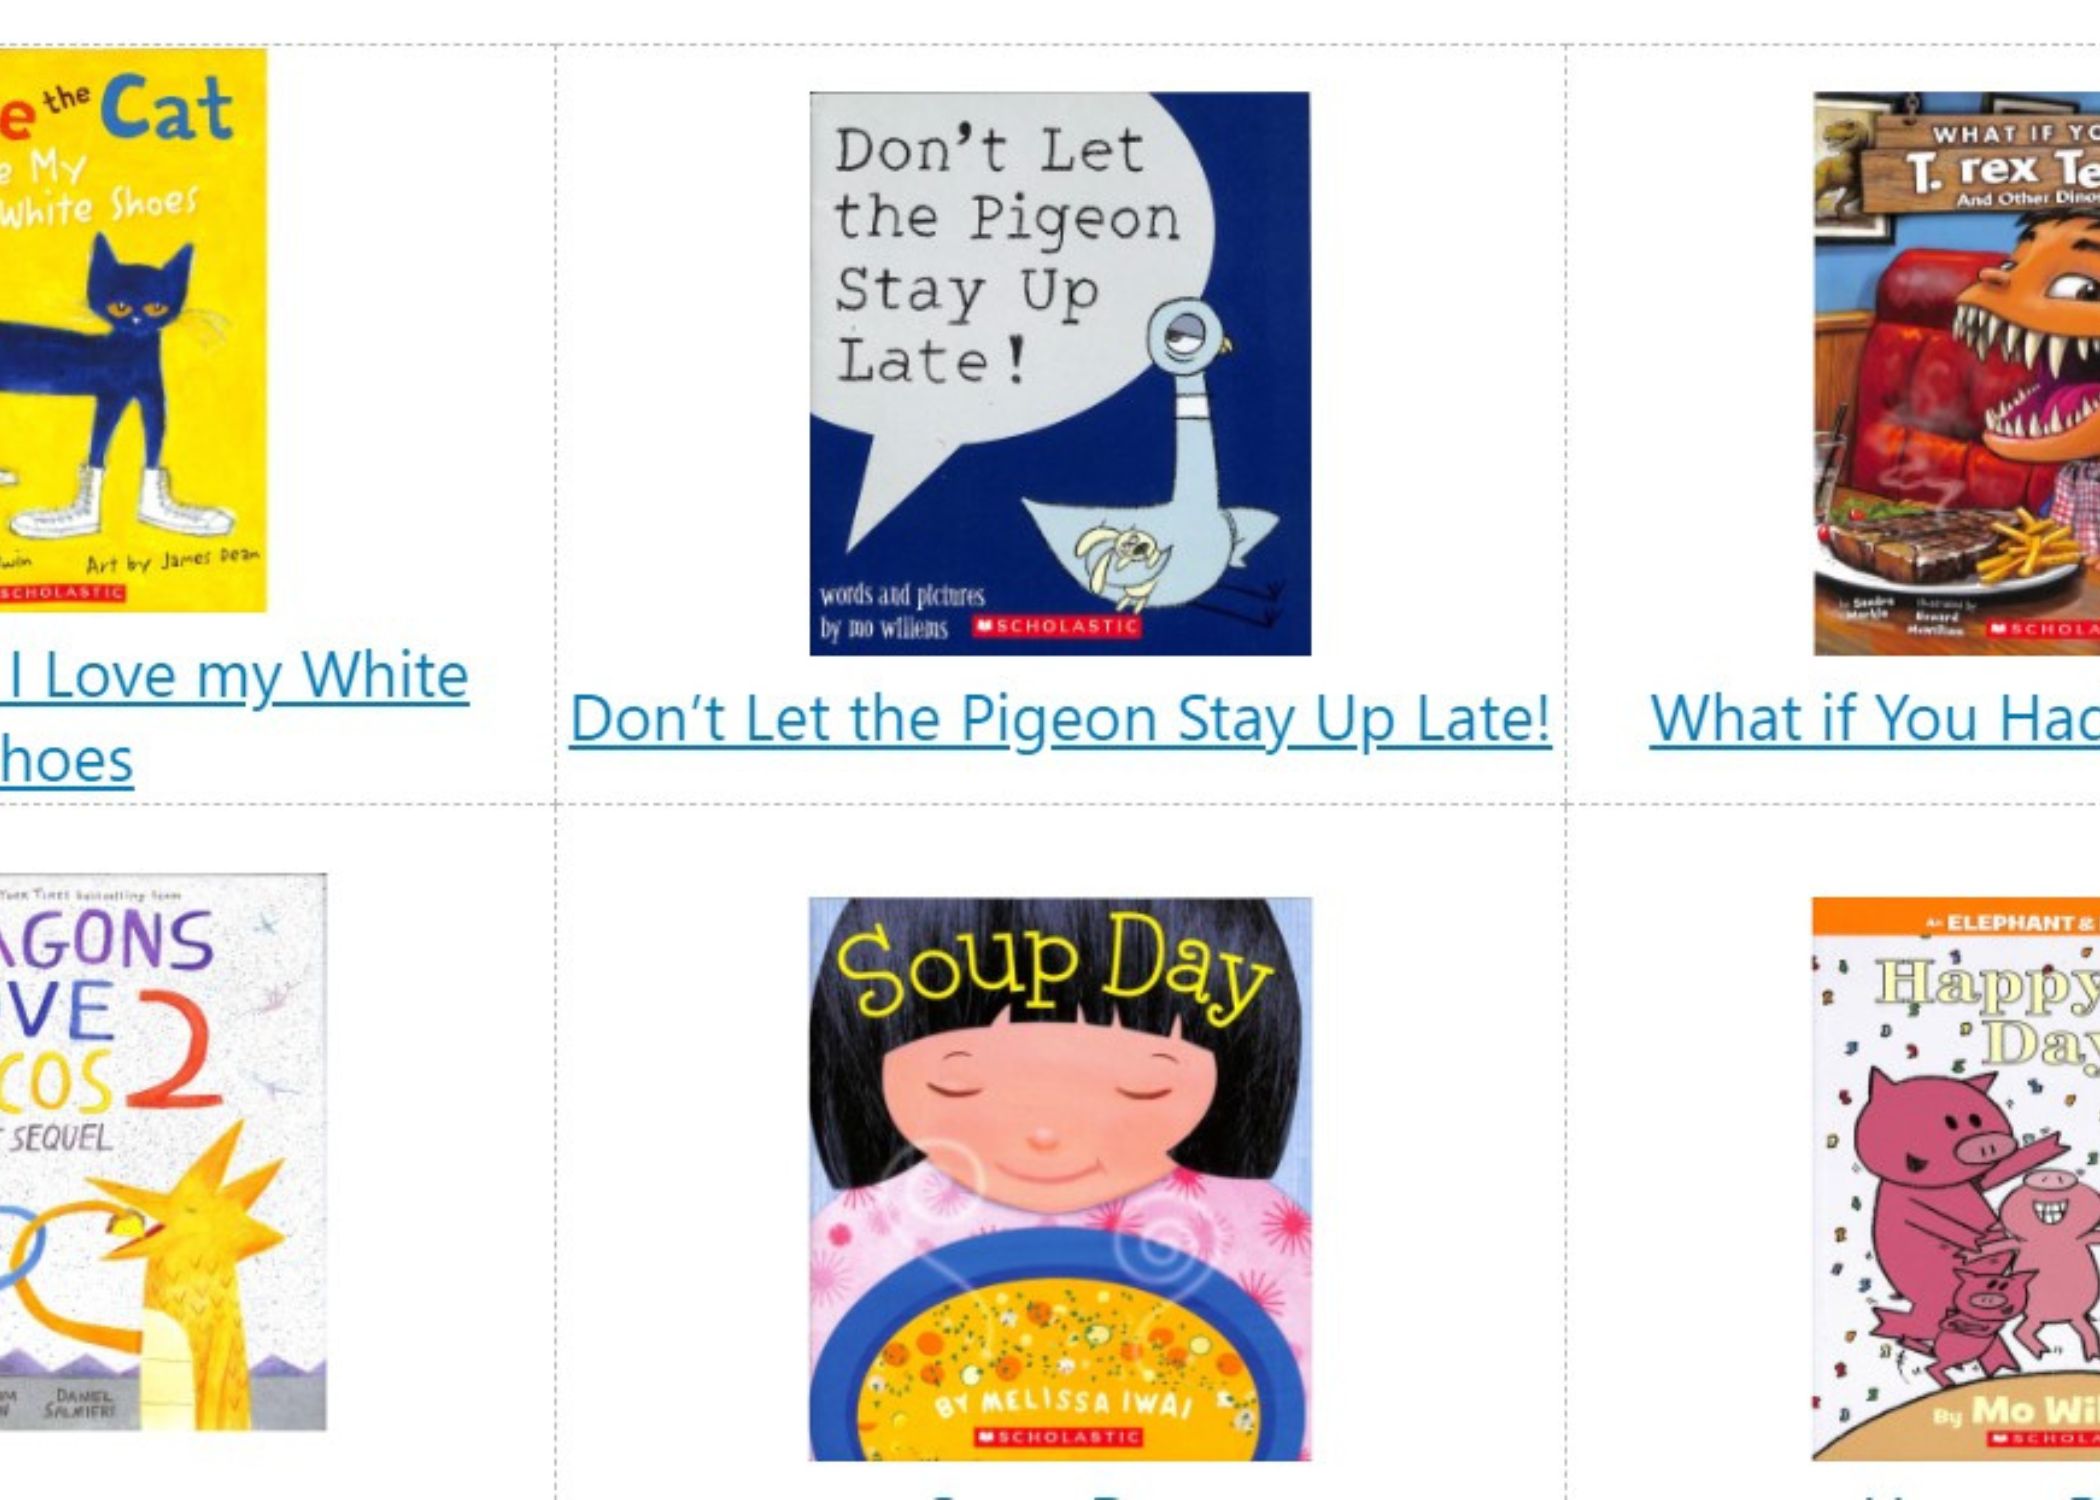 Screenshot of the Top 25 Books post showing several covers of picture books with the title underneath.